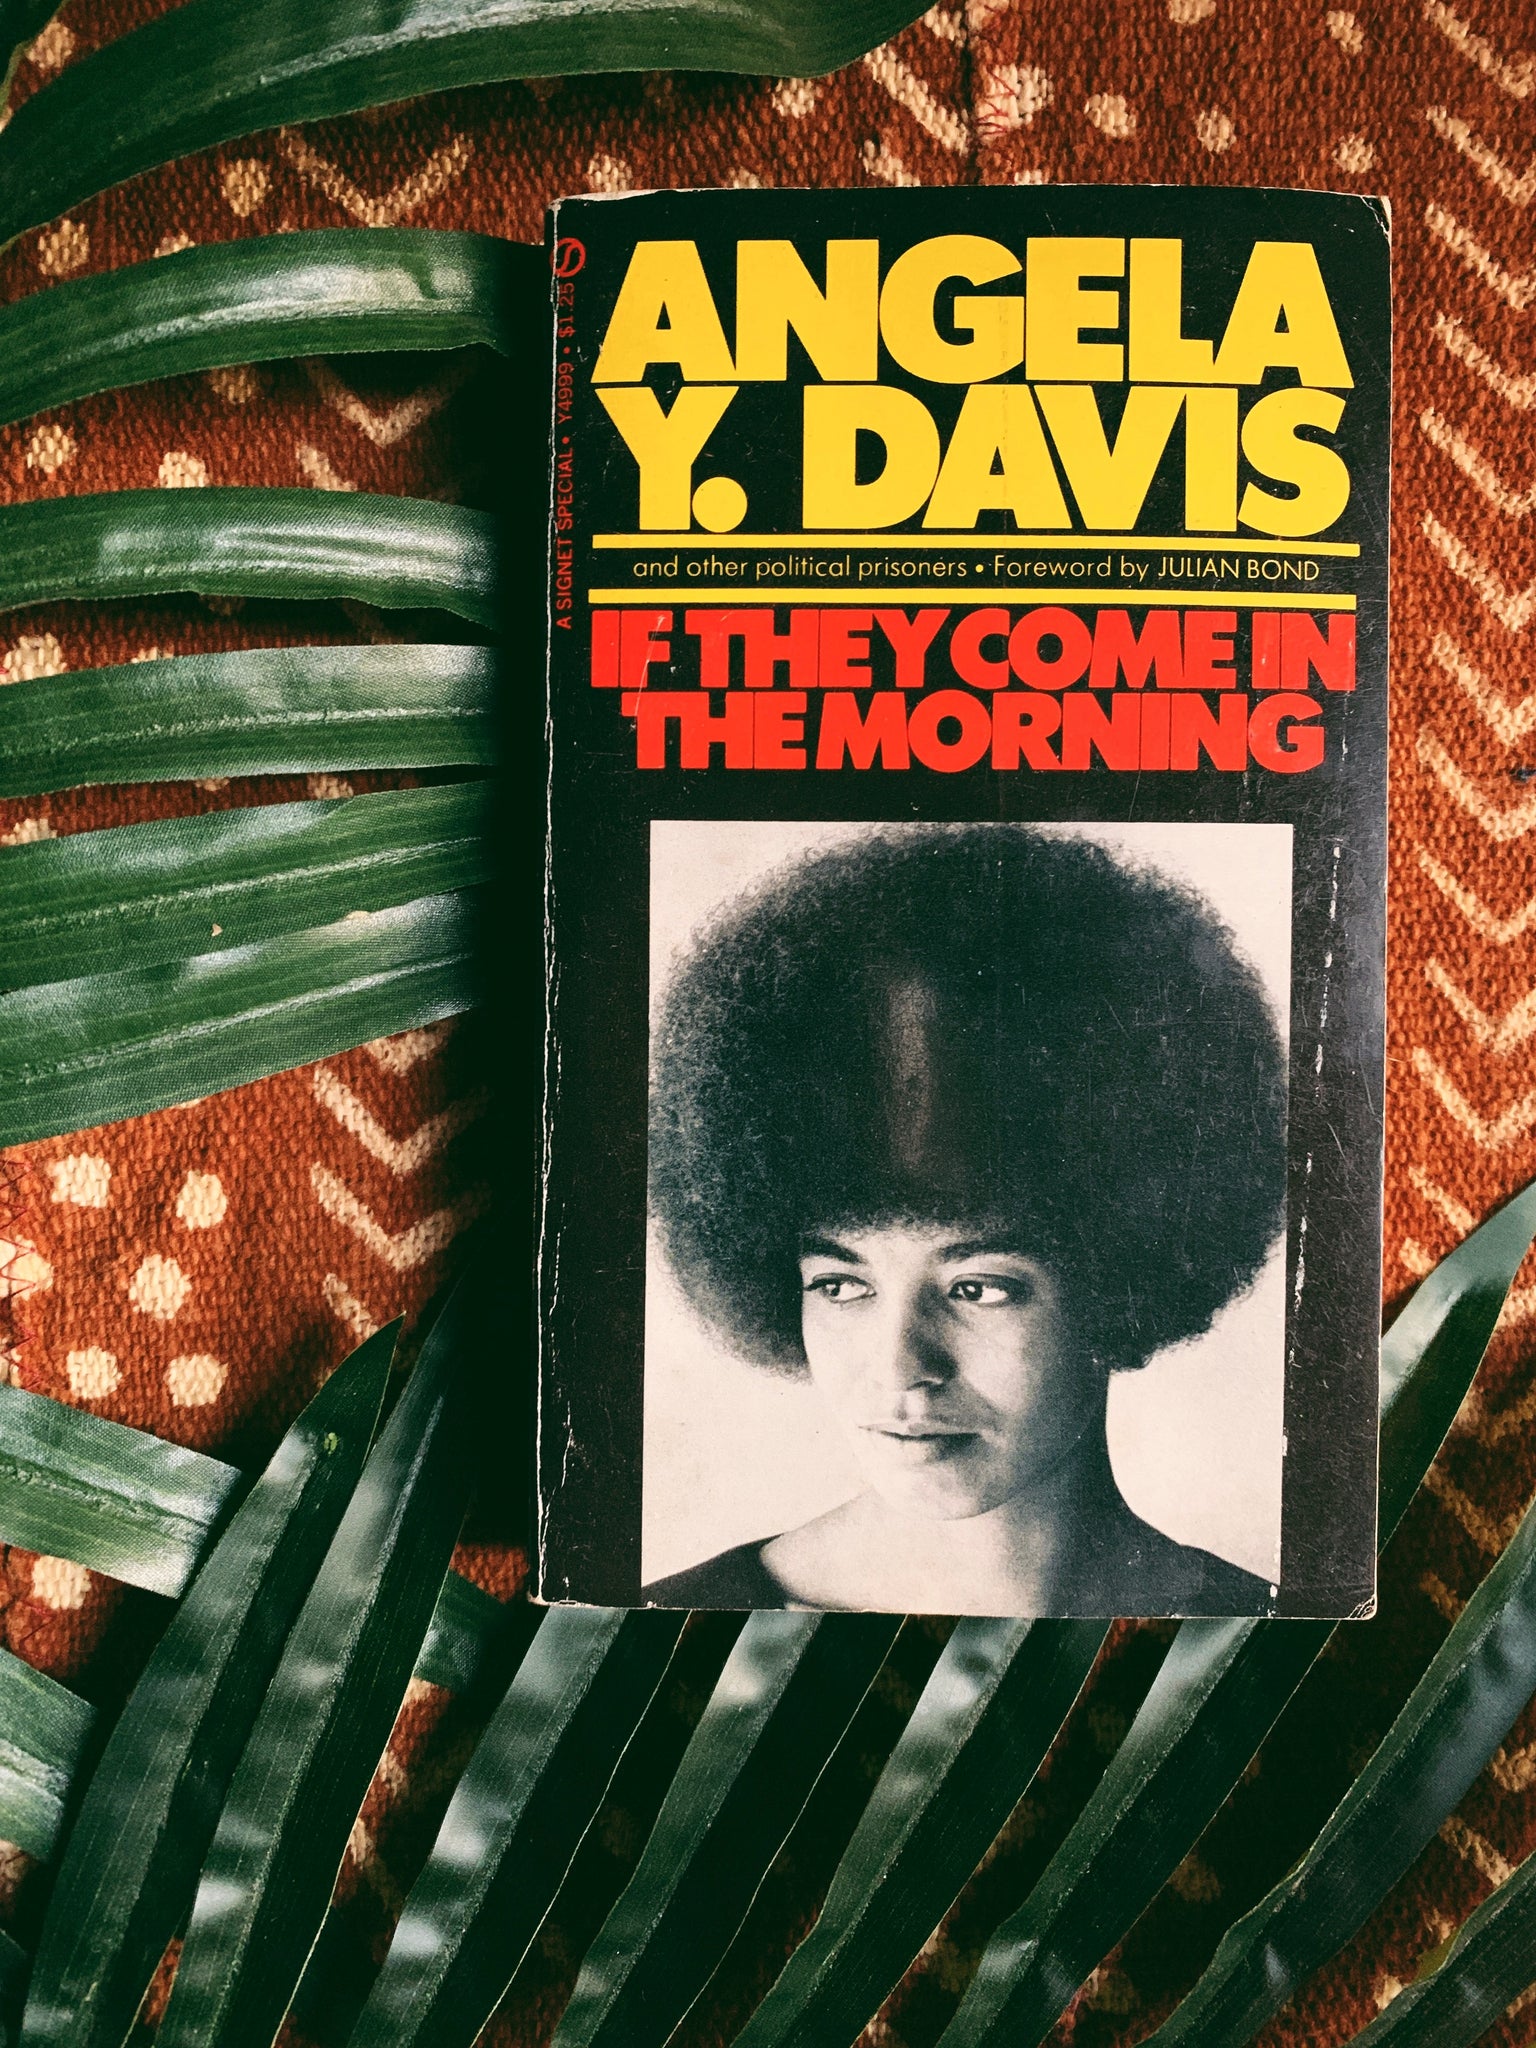 Vintage Softcover "If They Come In The Morning" by Angela Davis (First Signet Edition, 1971)